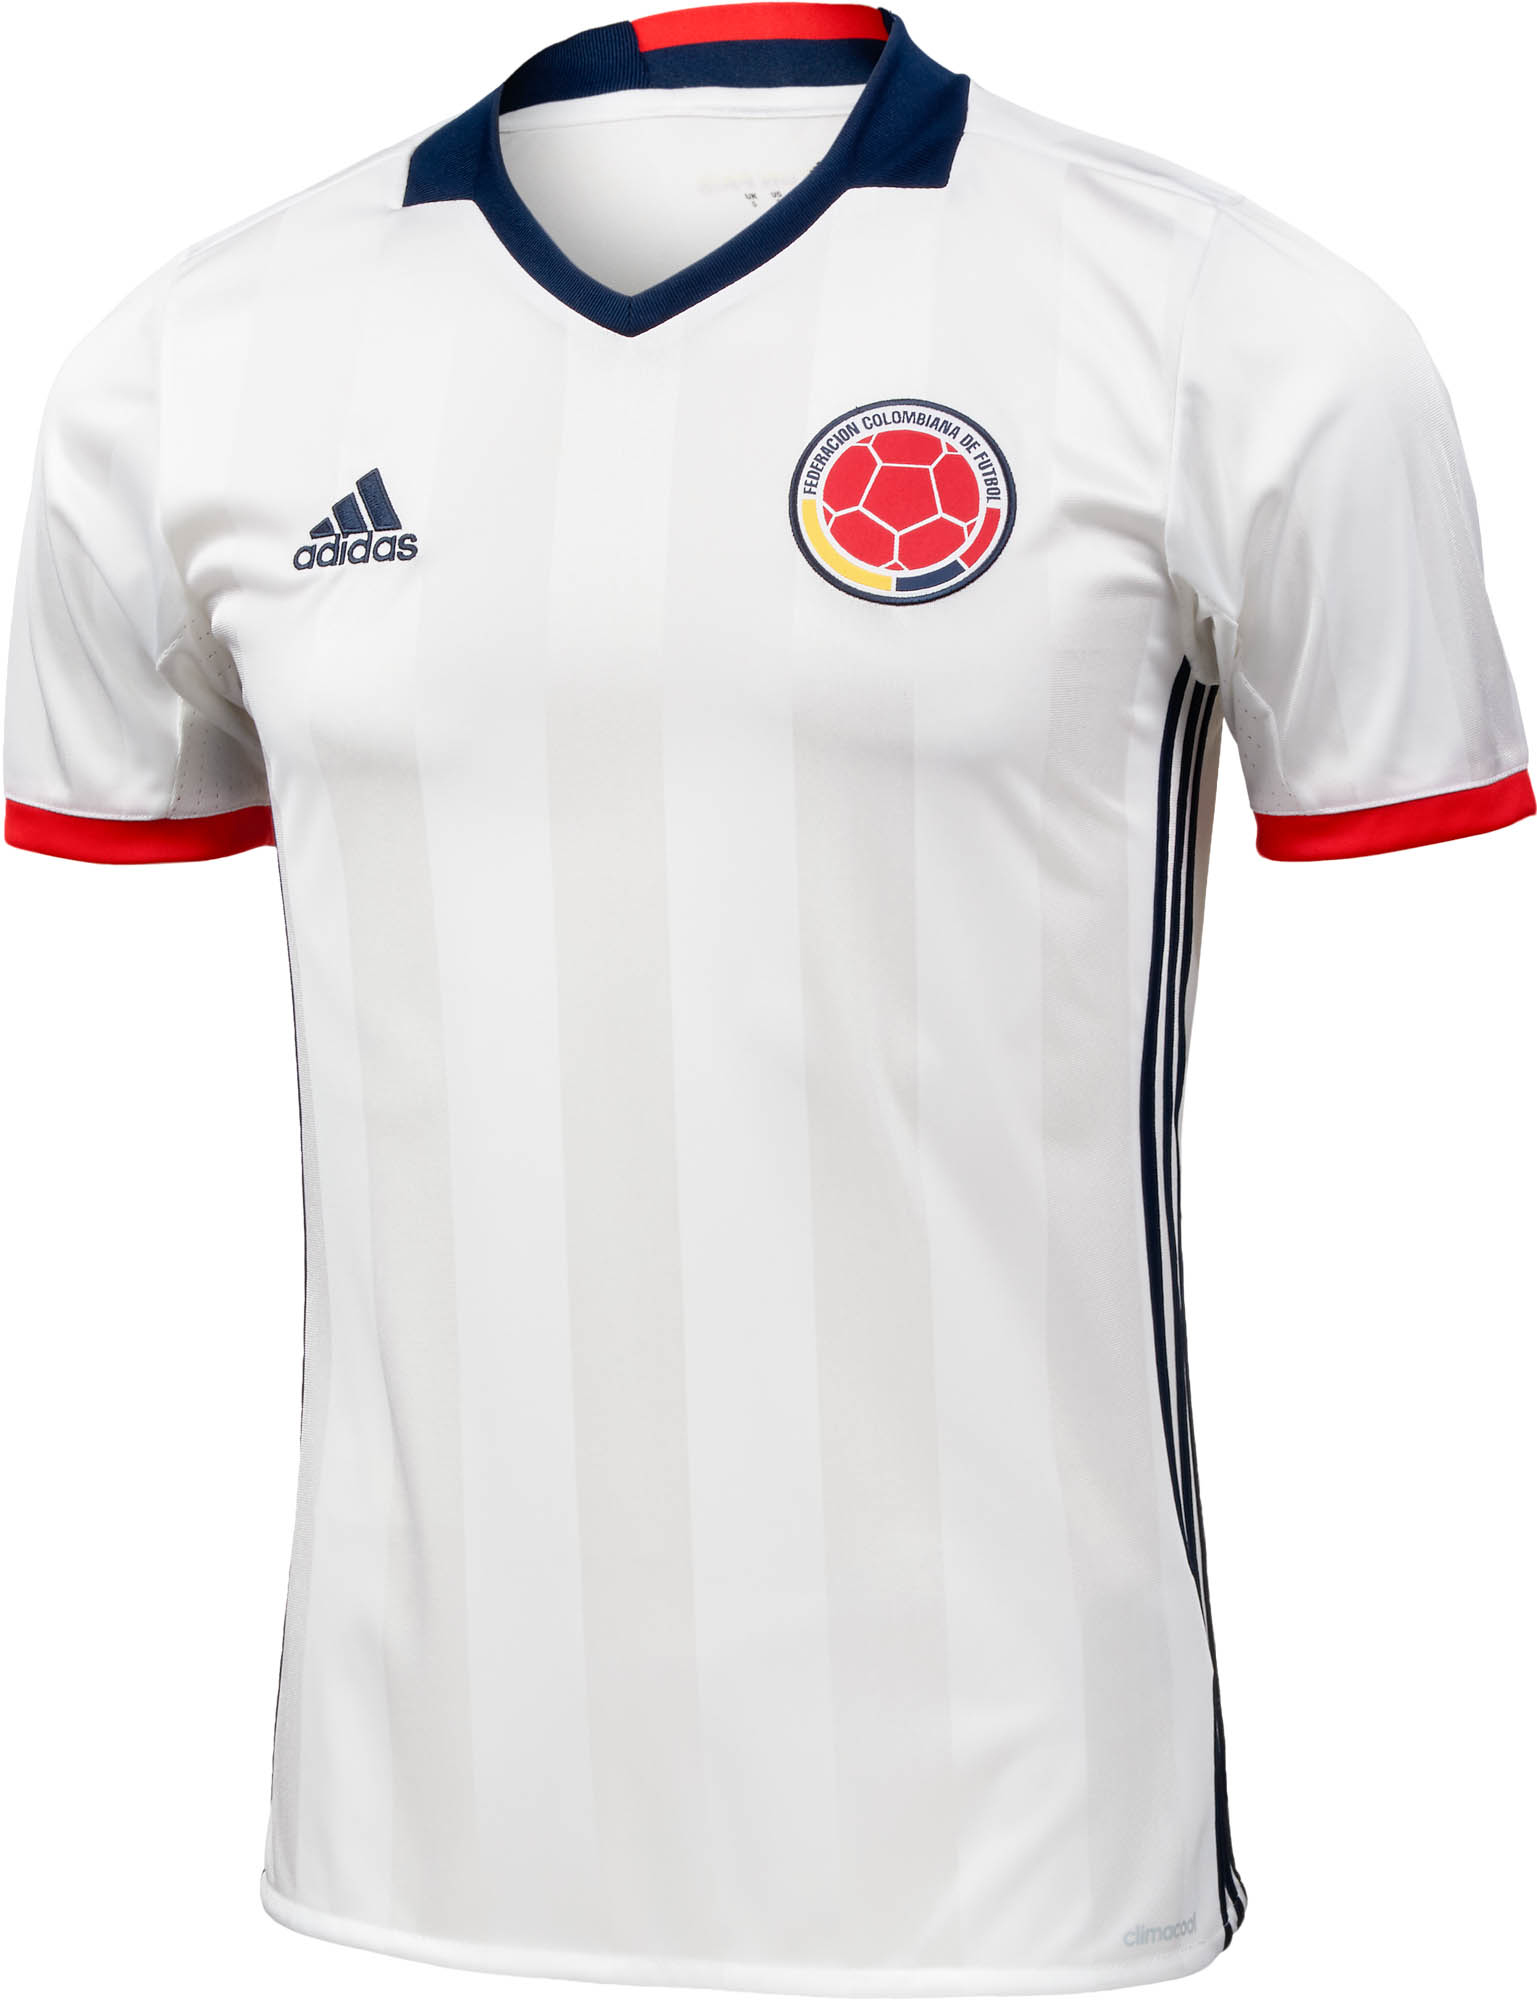 colombia soccer jersey 2014